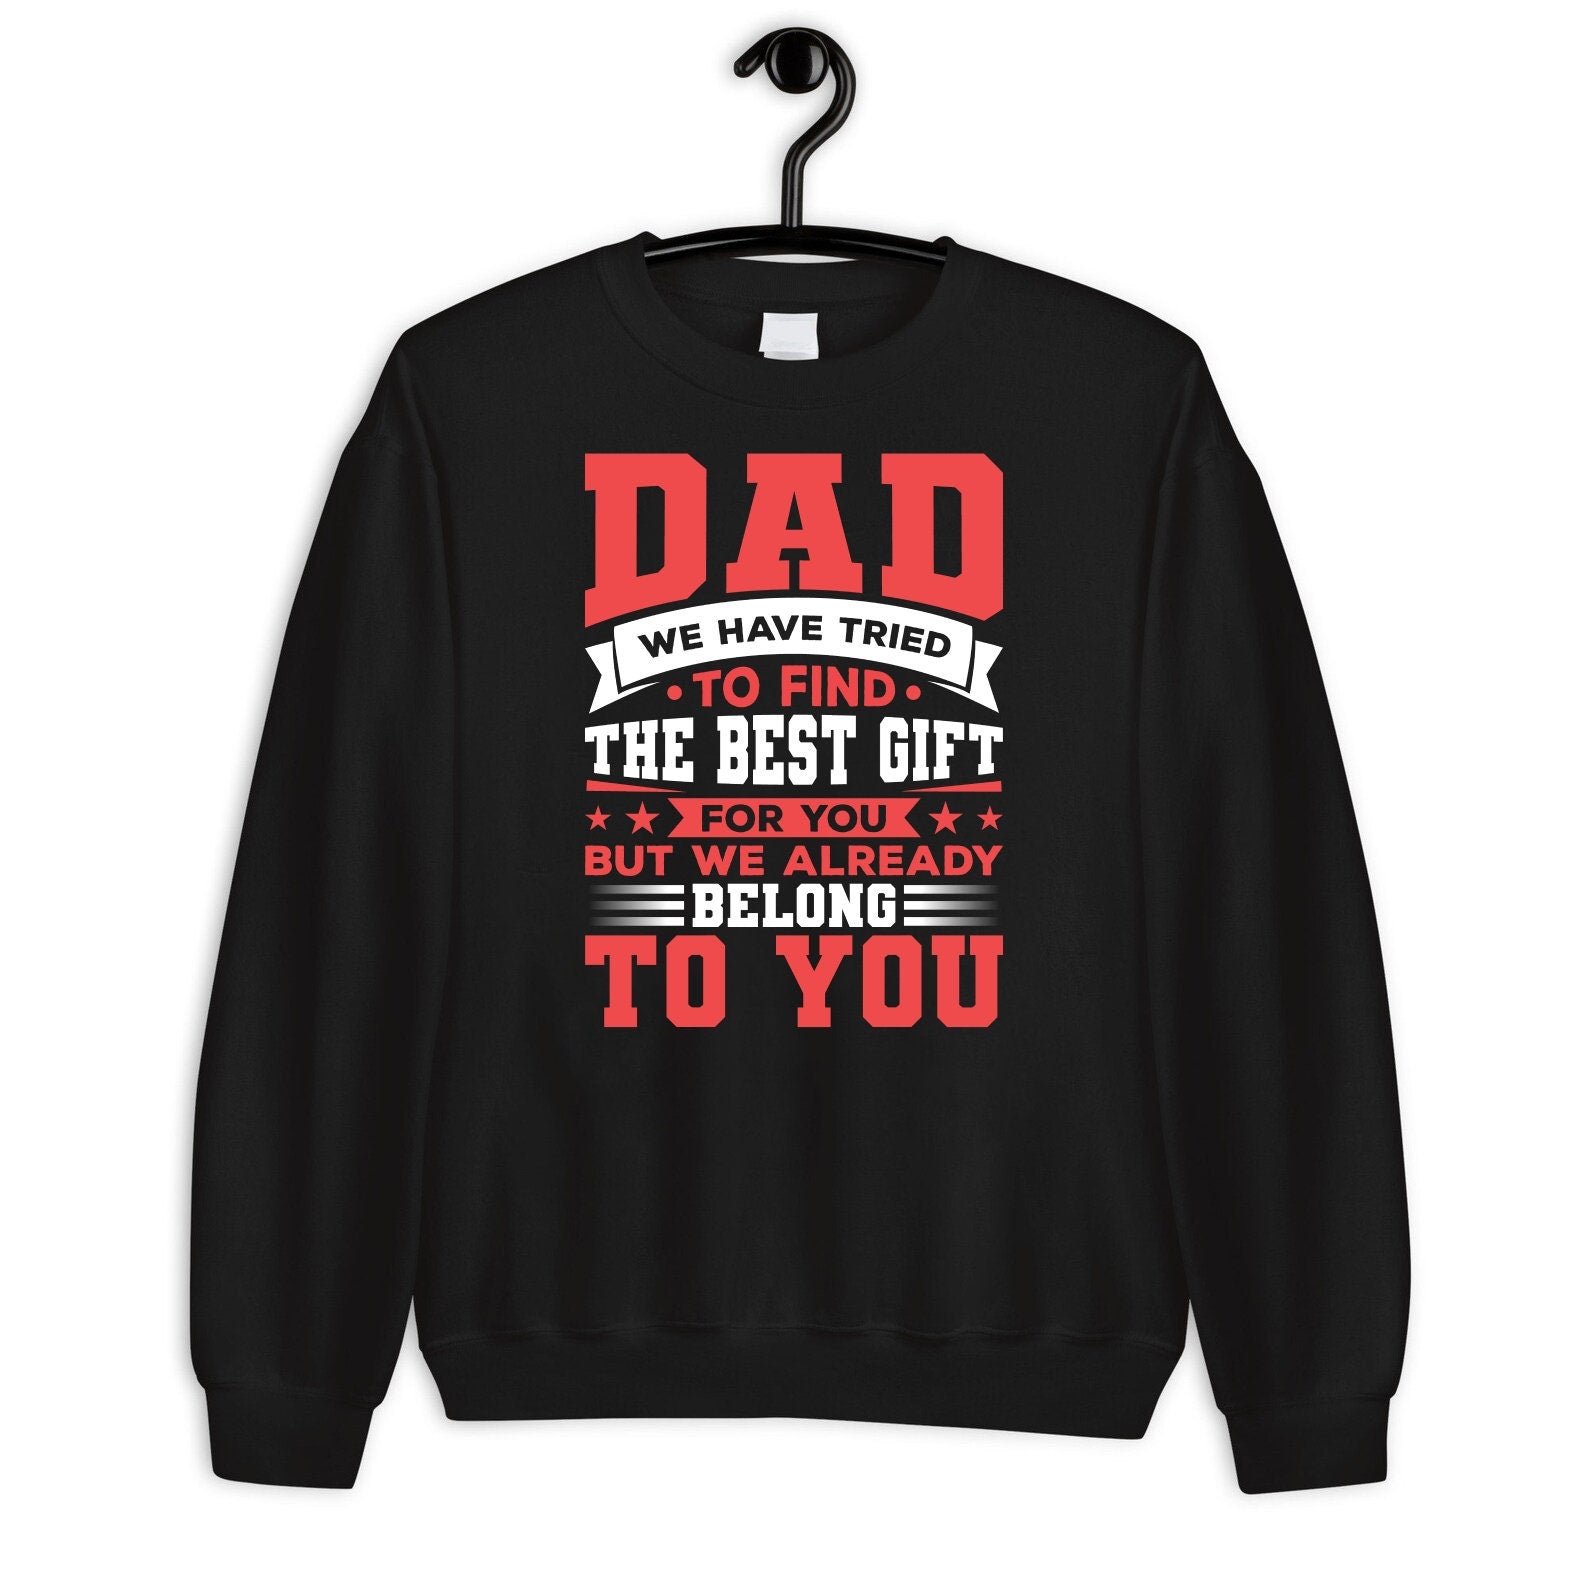 Dad We Have Tried To Find The Best Gift For You But We Already Belong To You Shirt, Best Fathers Shirt